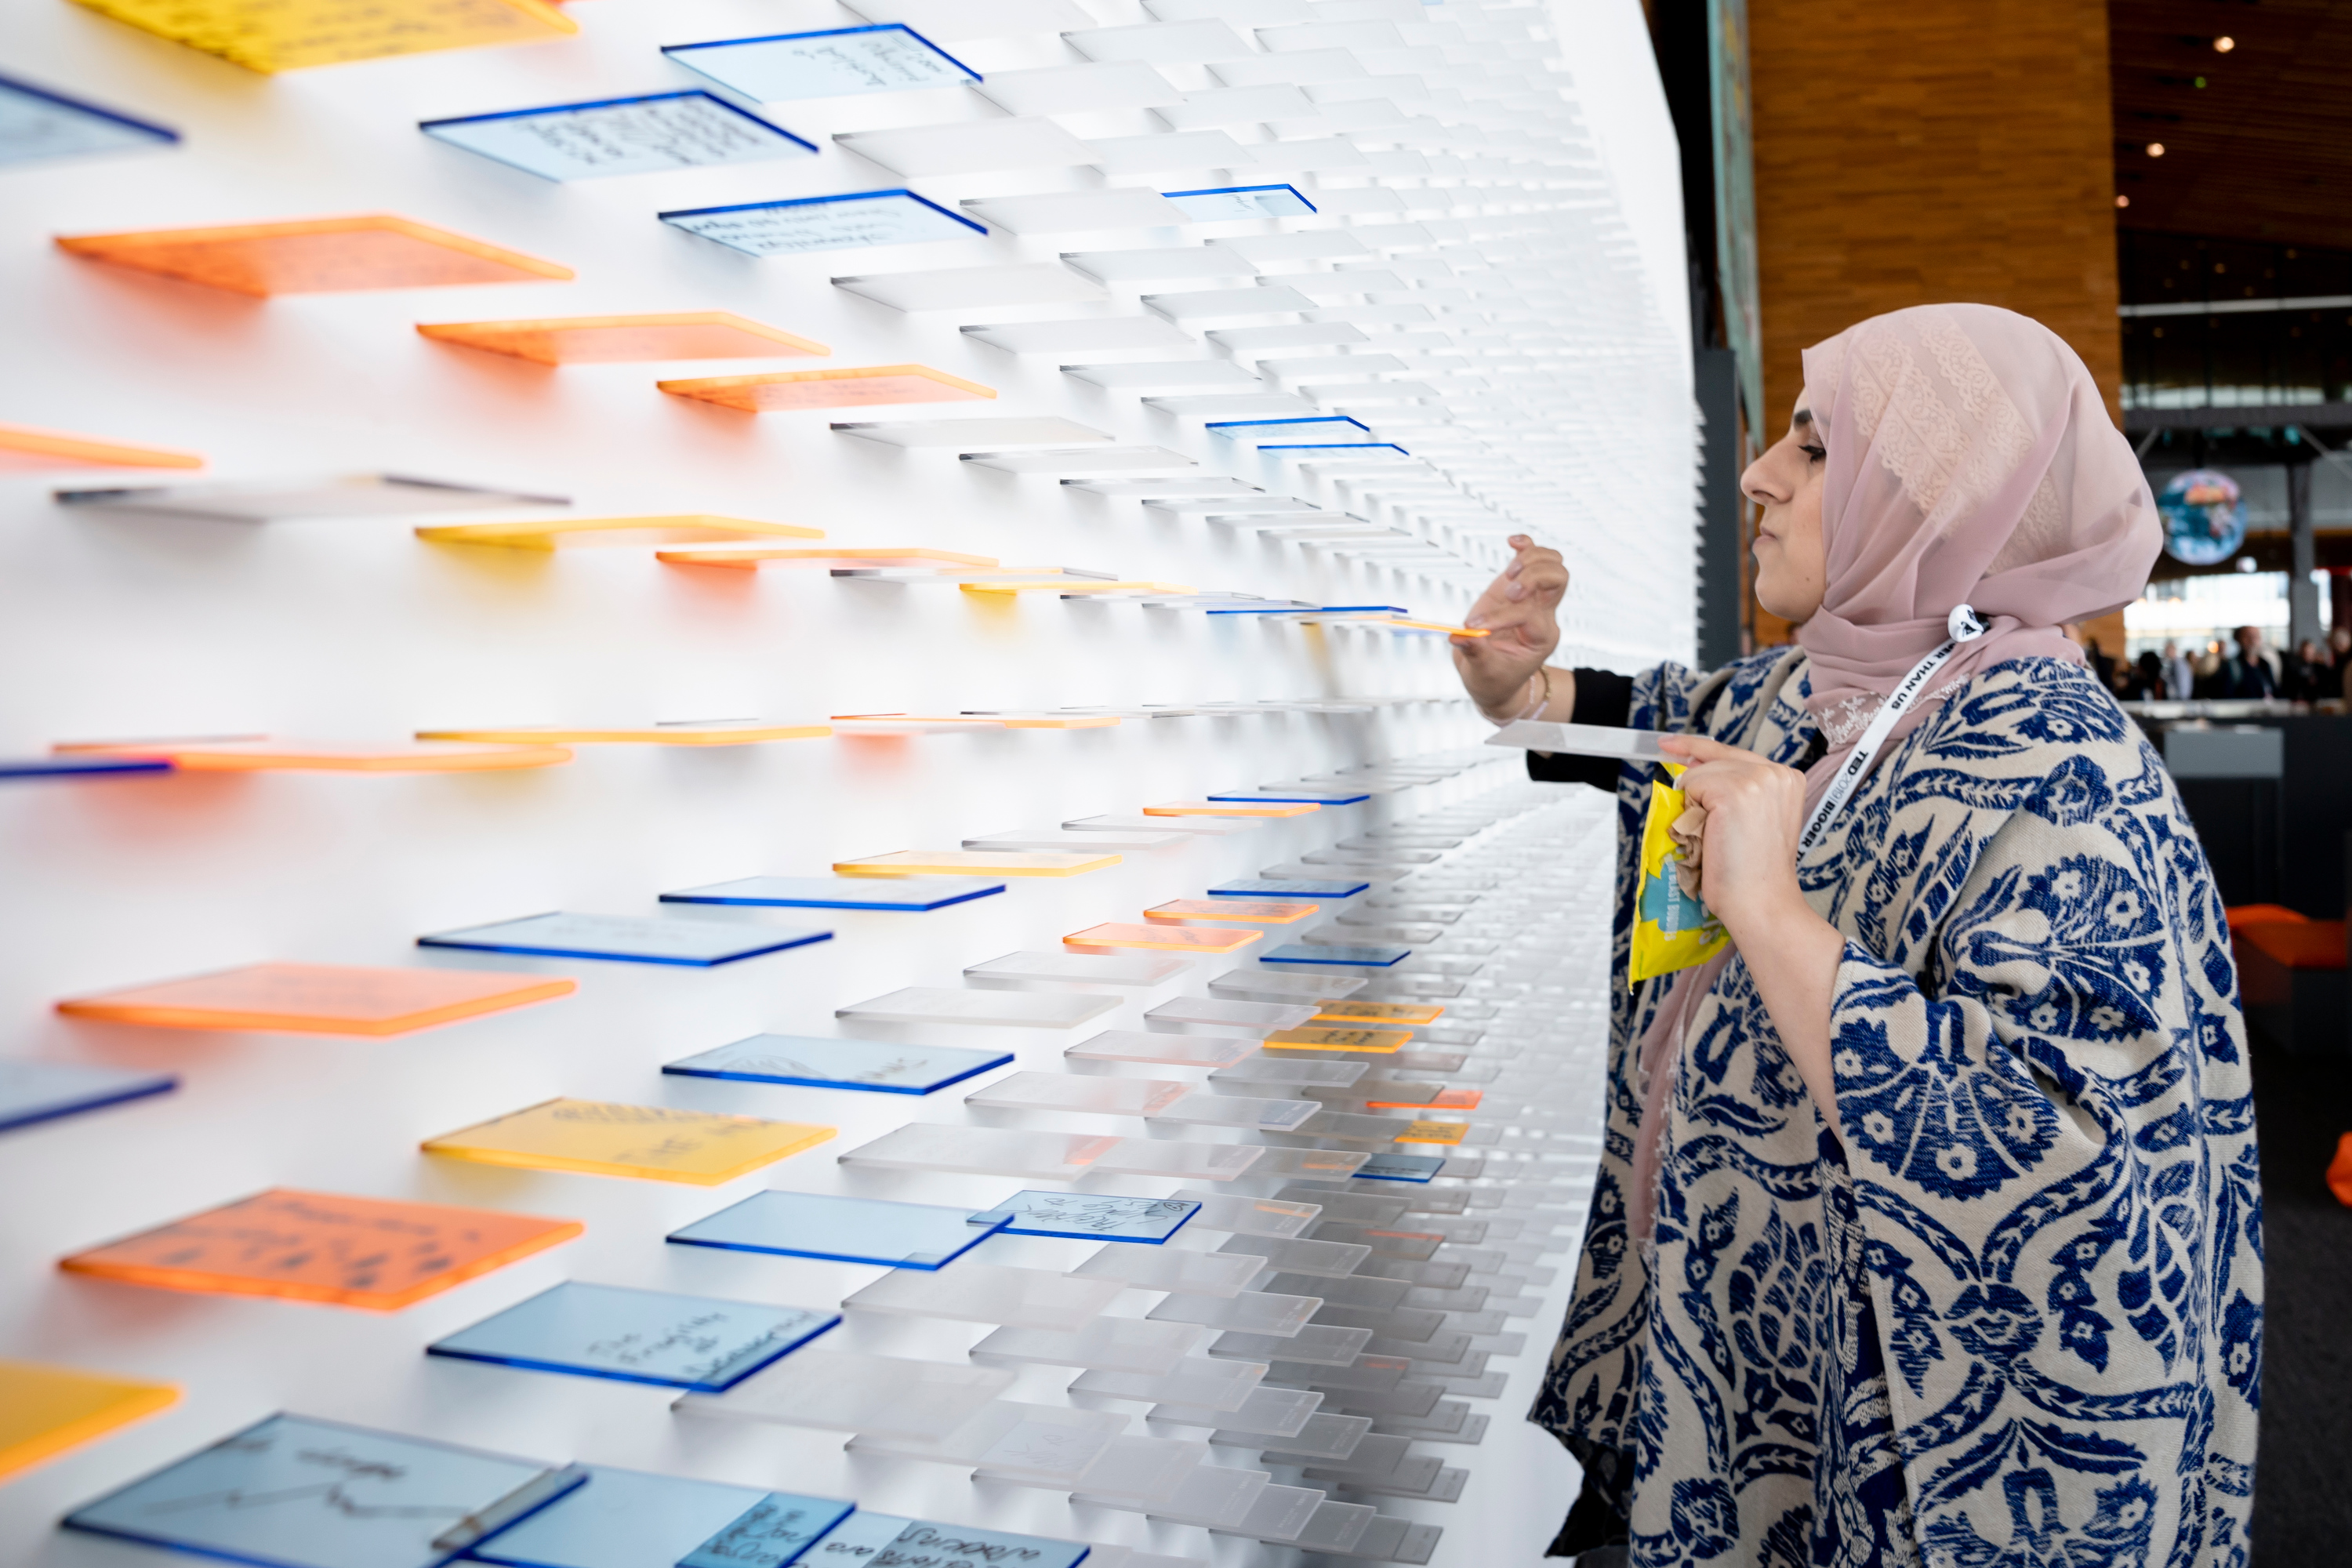 Attendee Fajir Amin adds an idea to the "moodbeam" installation at TED2019. The board was designed by Domestic Data Streamers and presented by Brightline Initiative.